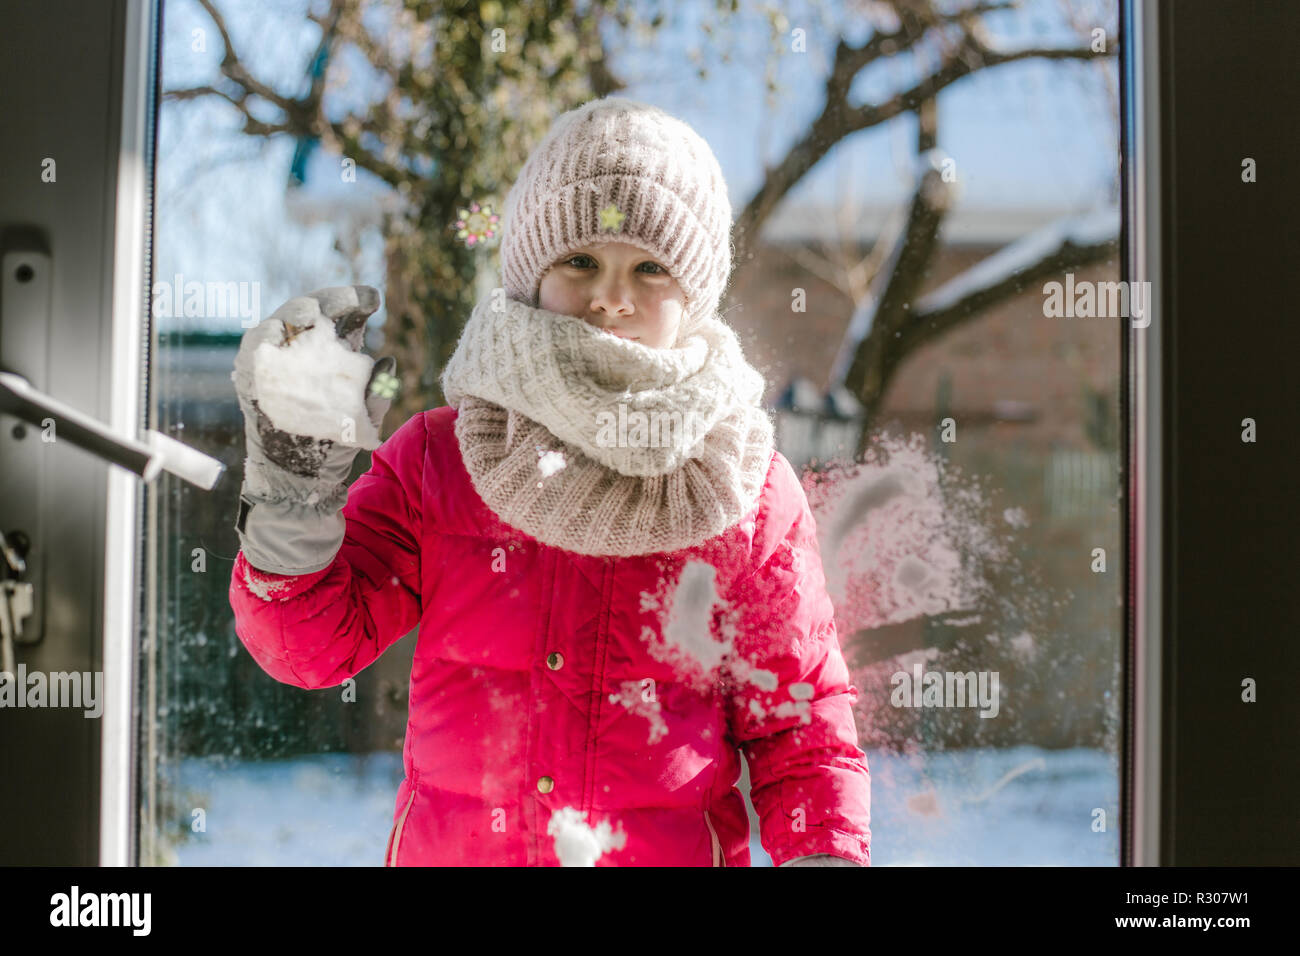 Seven-year-old cute girl in winter clothes is standing outside the door, on the street with snow in her hands and looking into the house smiling. Stock Photo